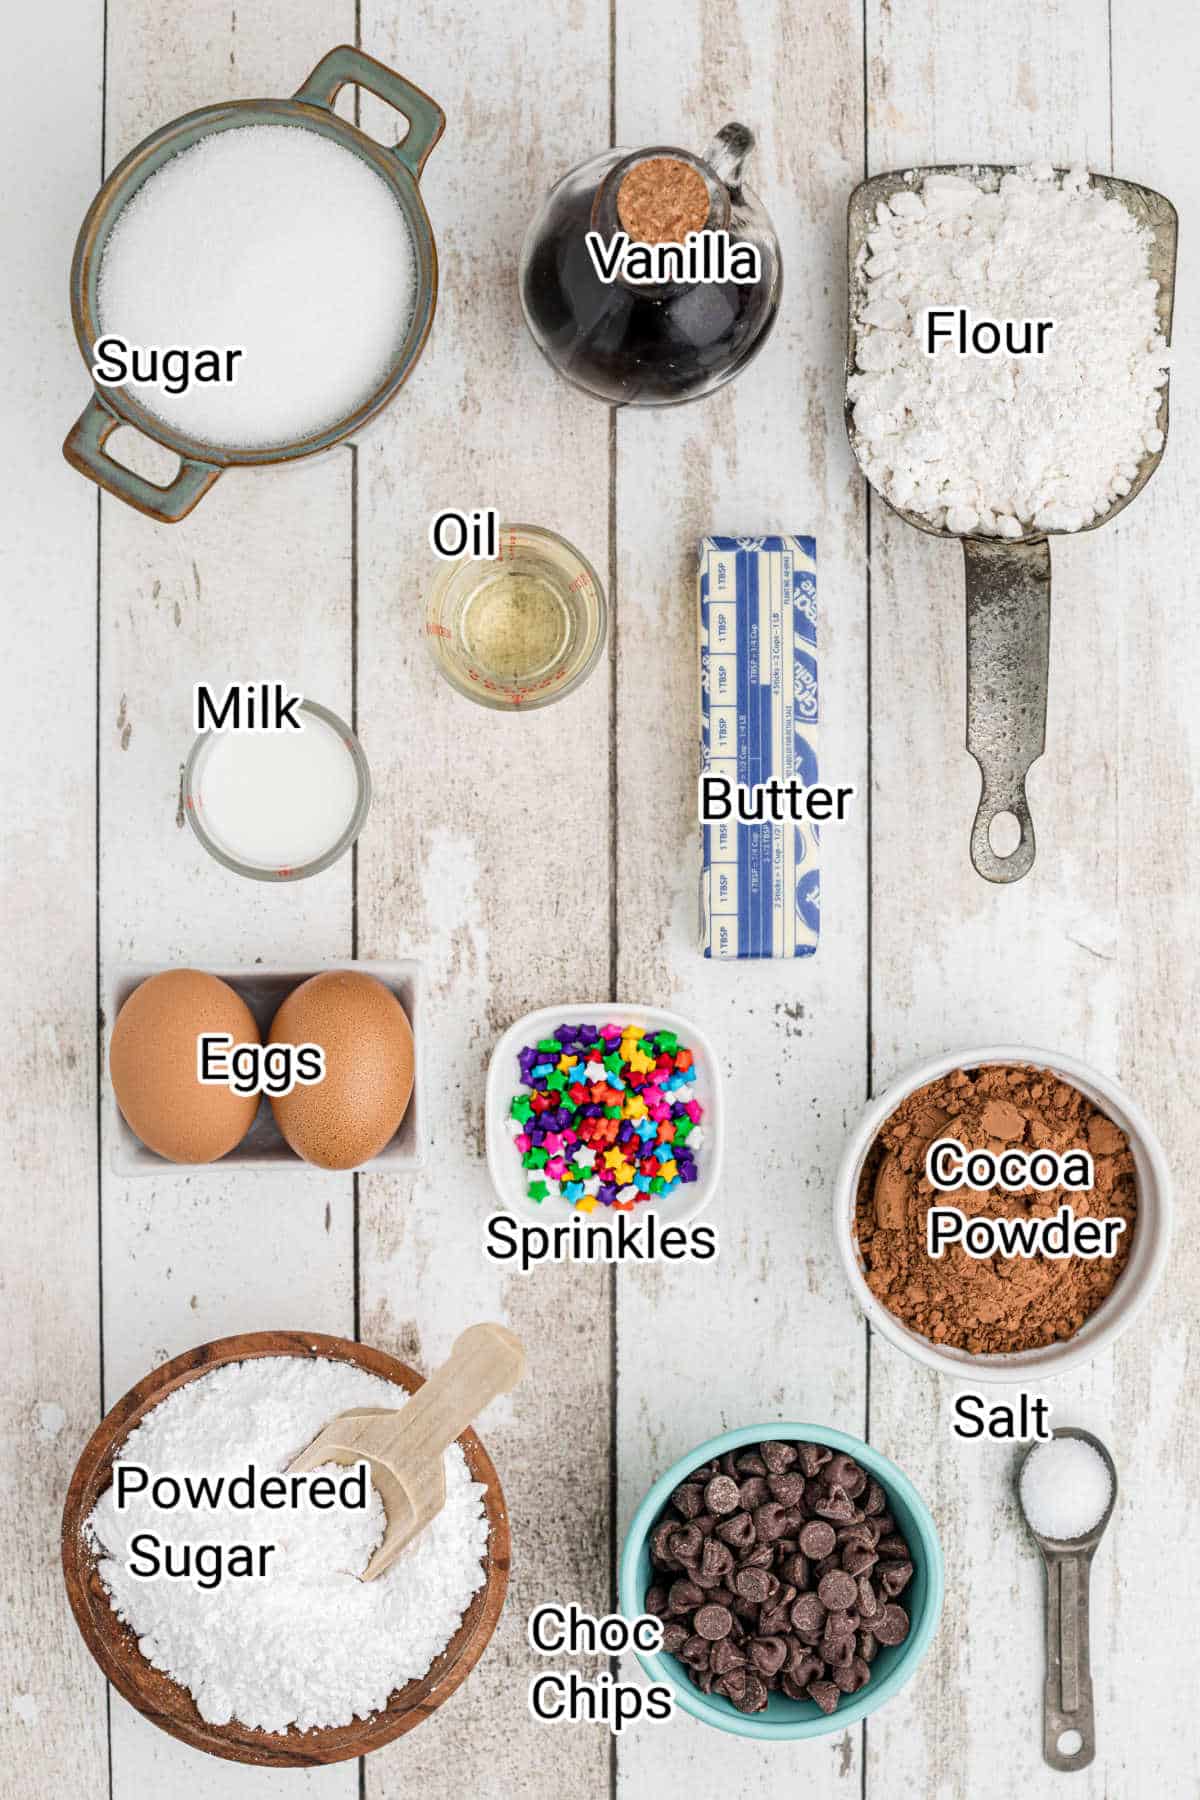 ingredients all laid out for what you'll need to make birthday brownies